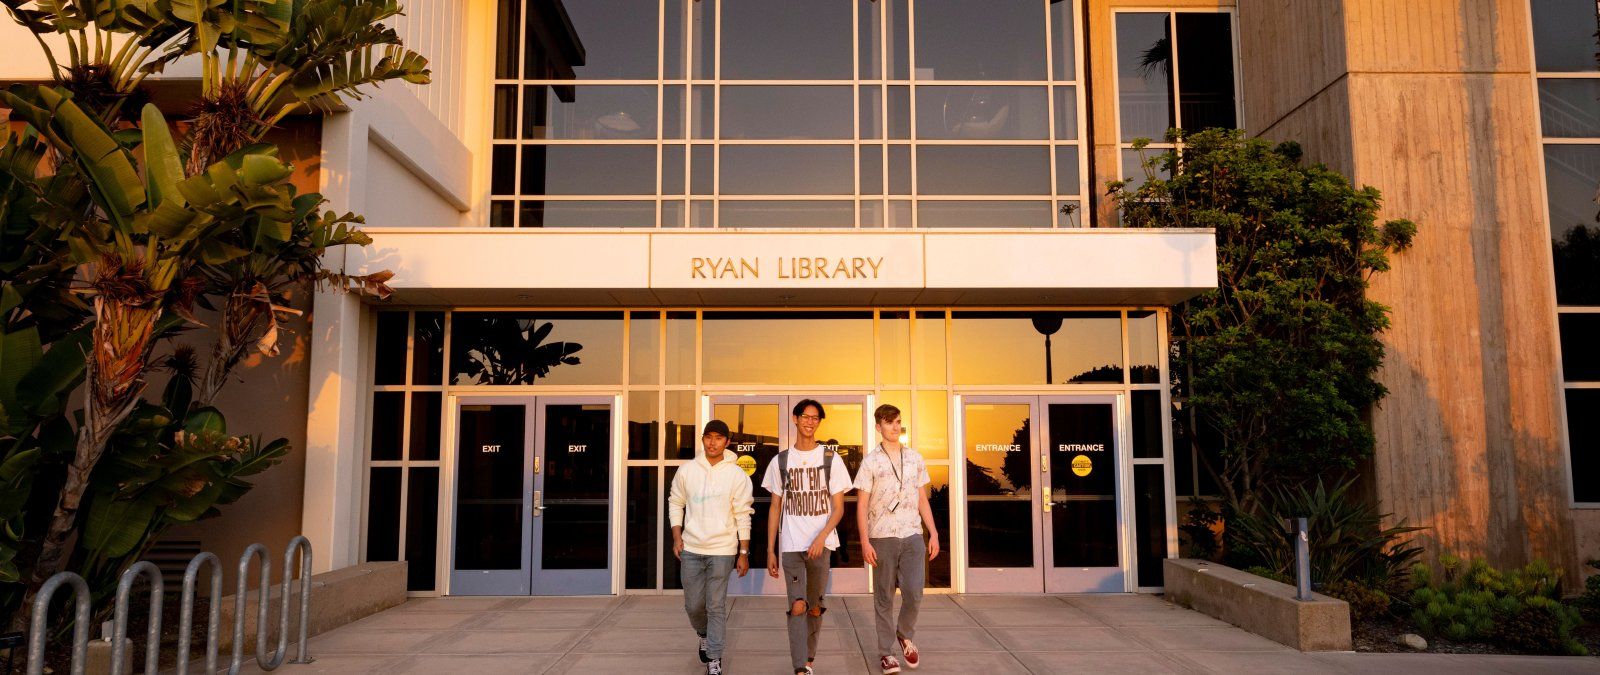 ryan library with three students standing in front 